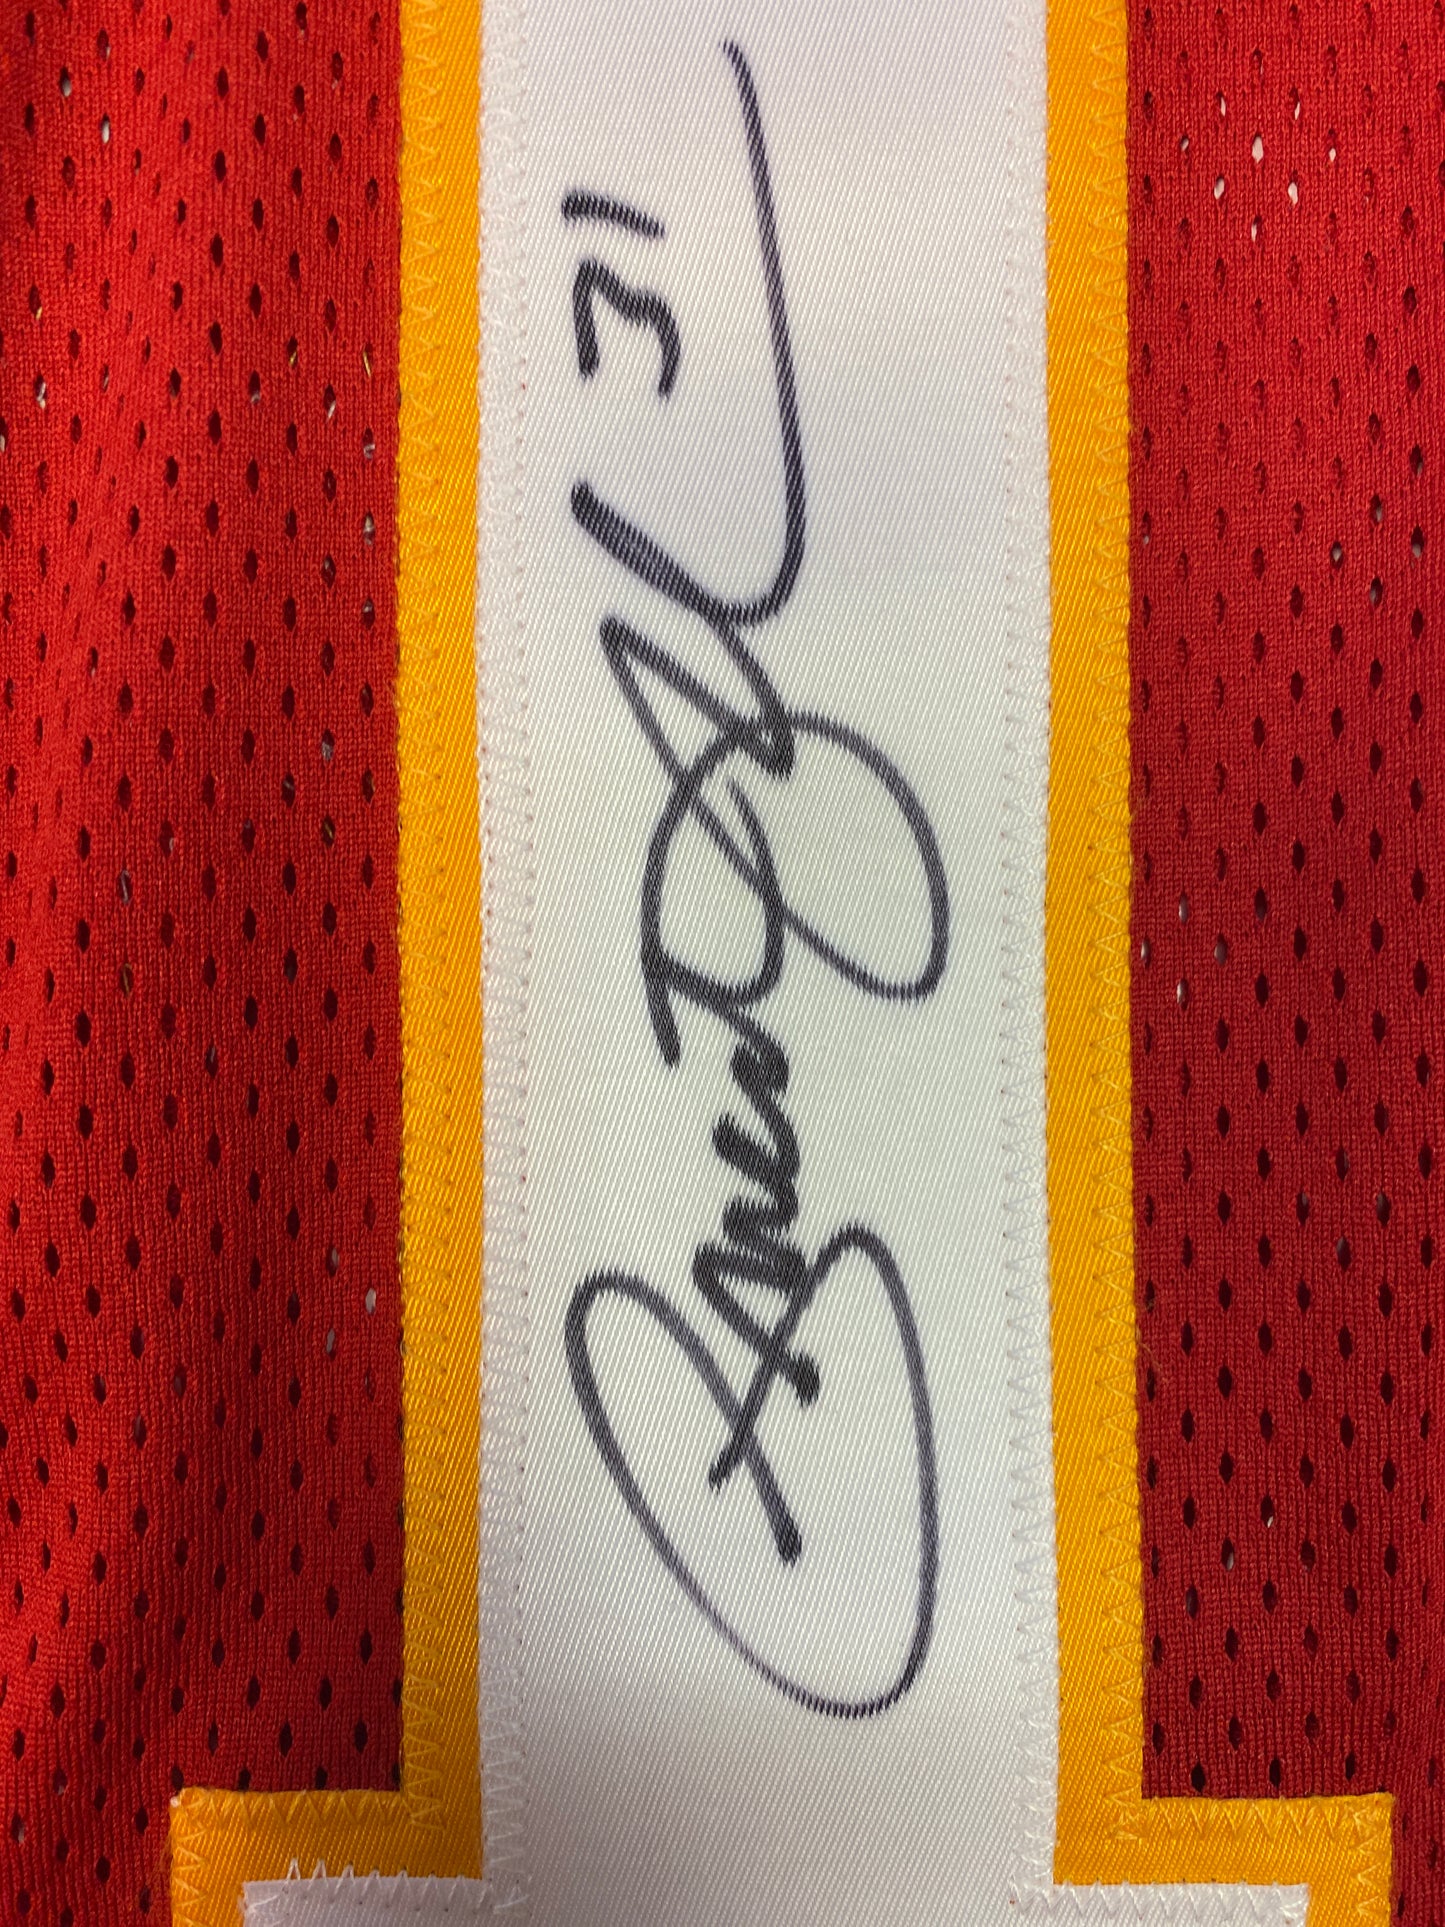 Priest Holmes Signed Chiefs Jersey